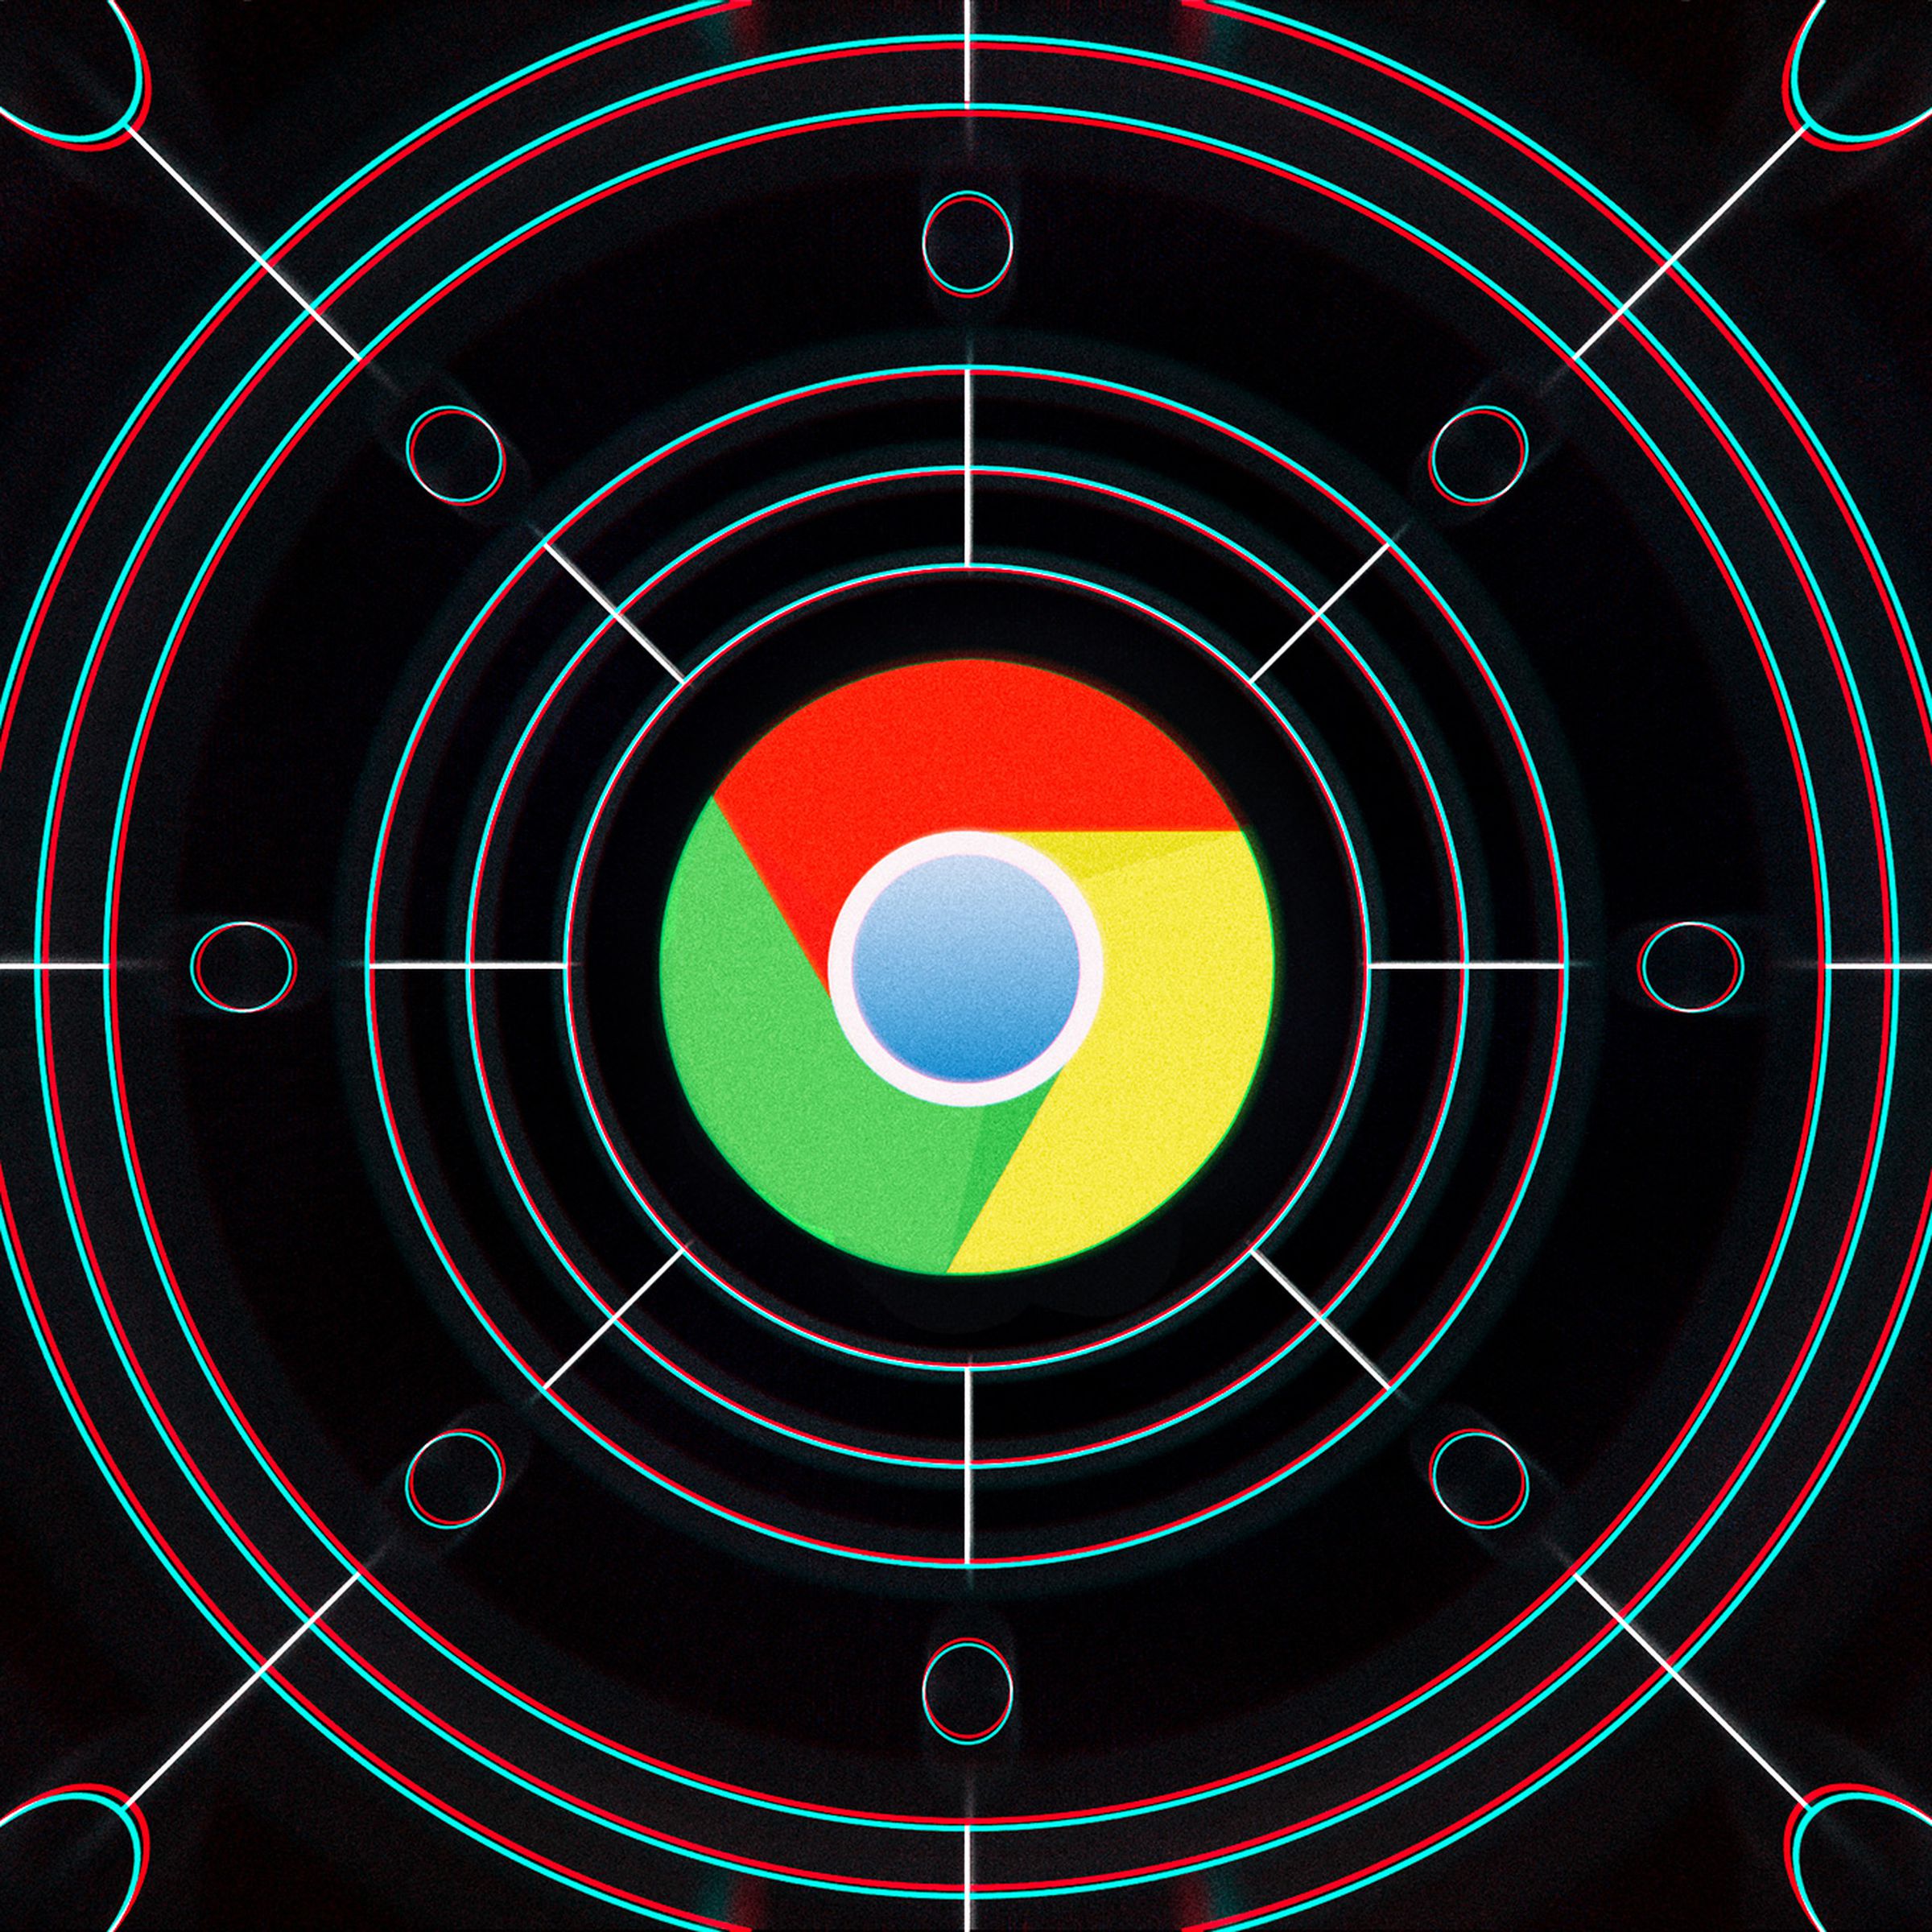 The Google Chrome logo in the center of a web-like graphic.